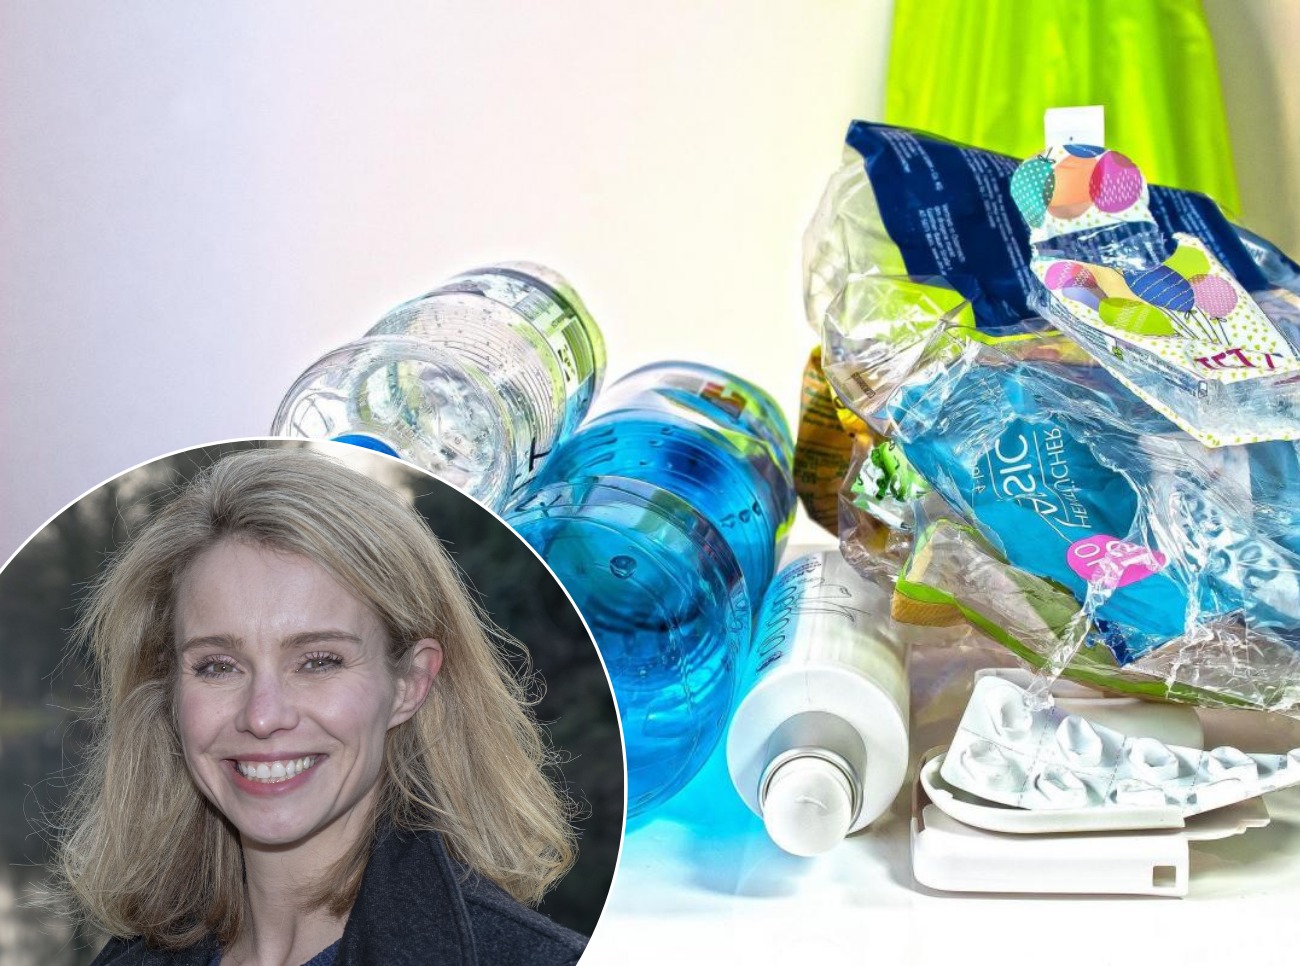 'We need to do much more to tackle plastic waste'